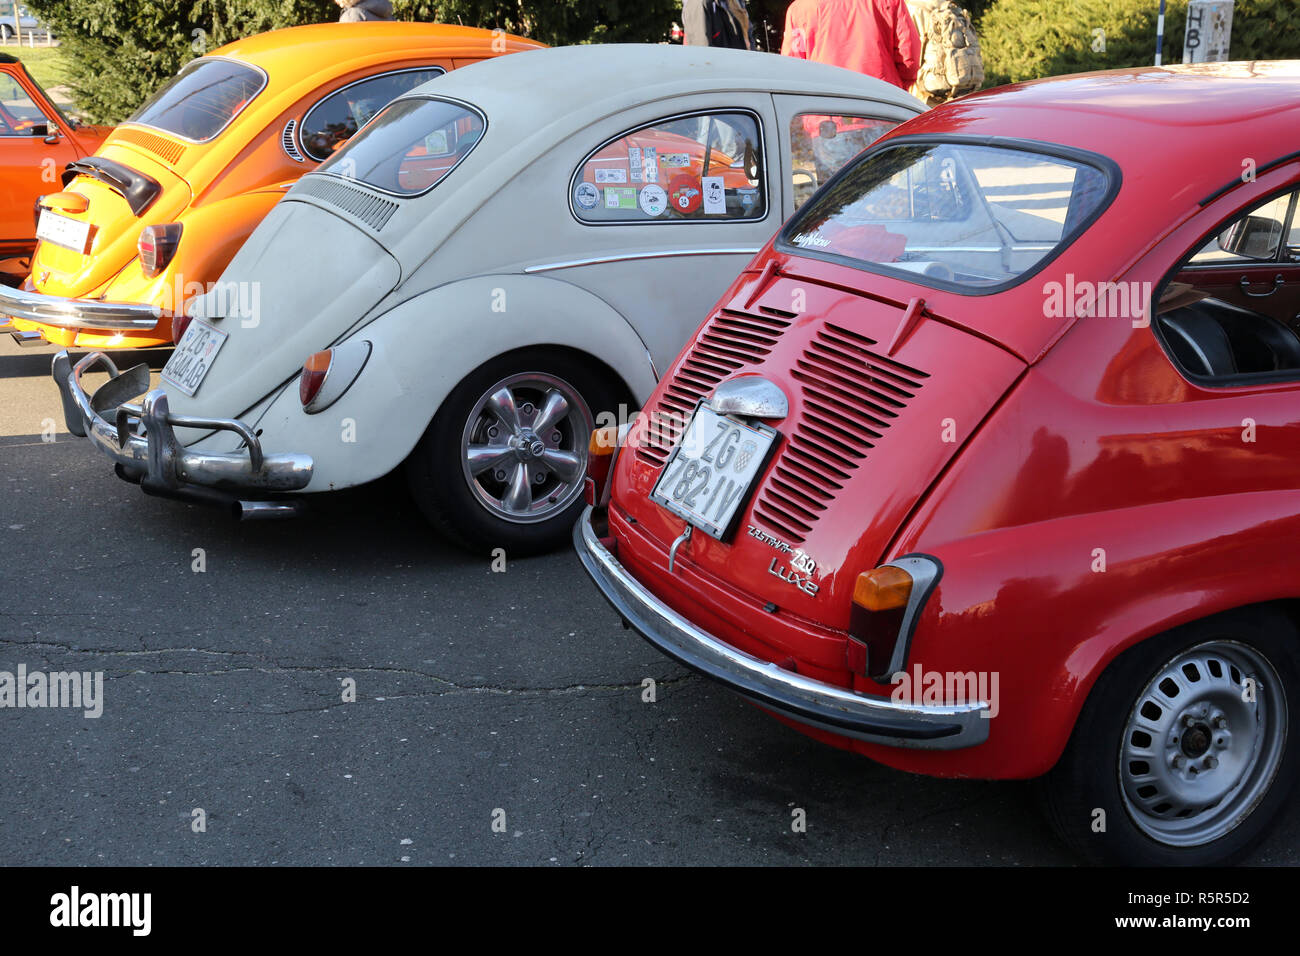 VW Volkswagen Beetle and Zastava 750, vintage cars exhibited during the Retro Mobile Parade in Zagreb, Croatia Stock Photo